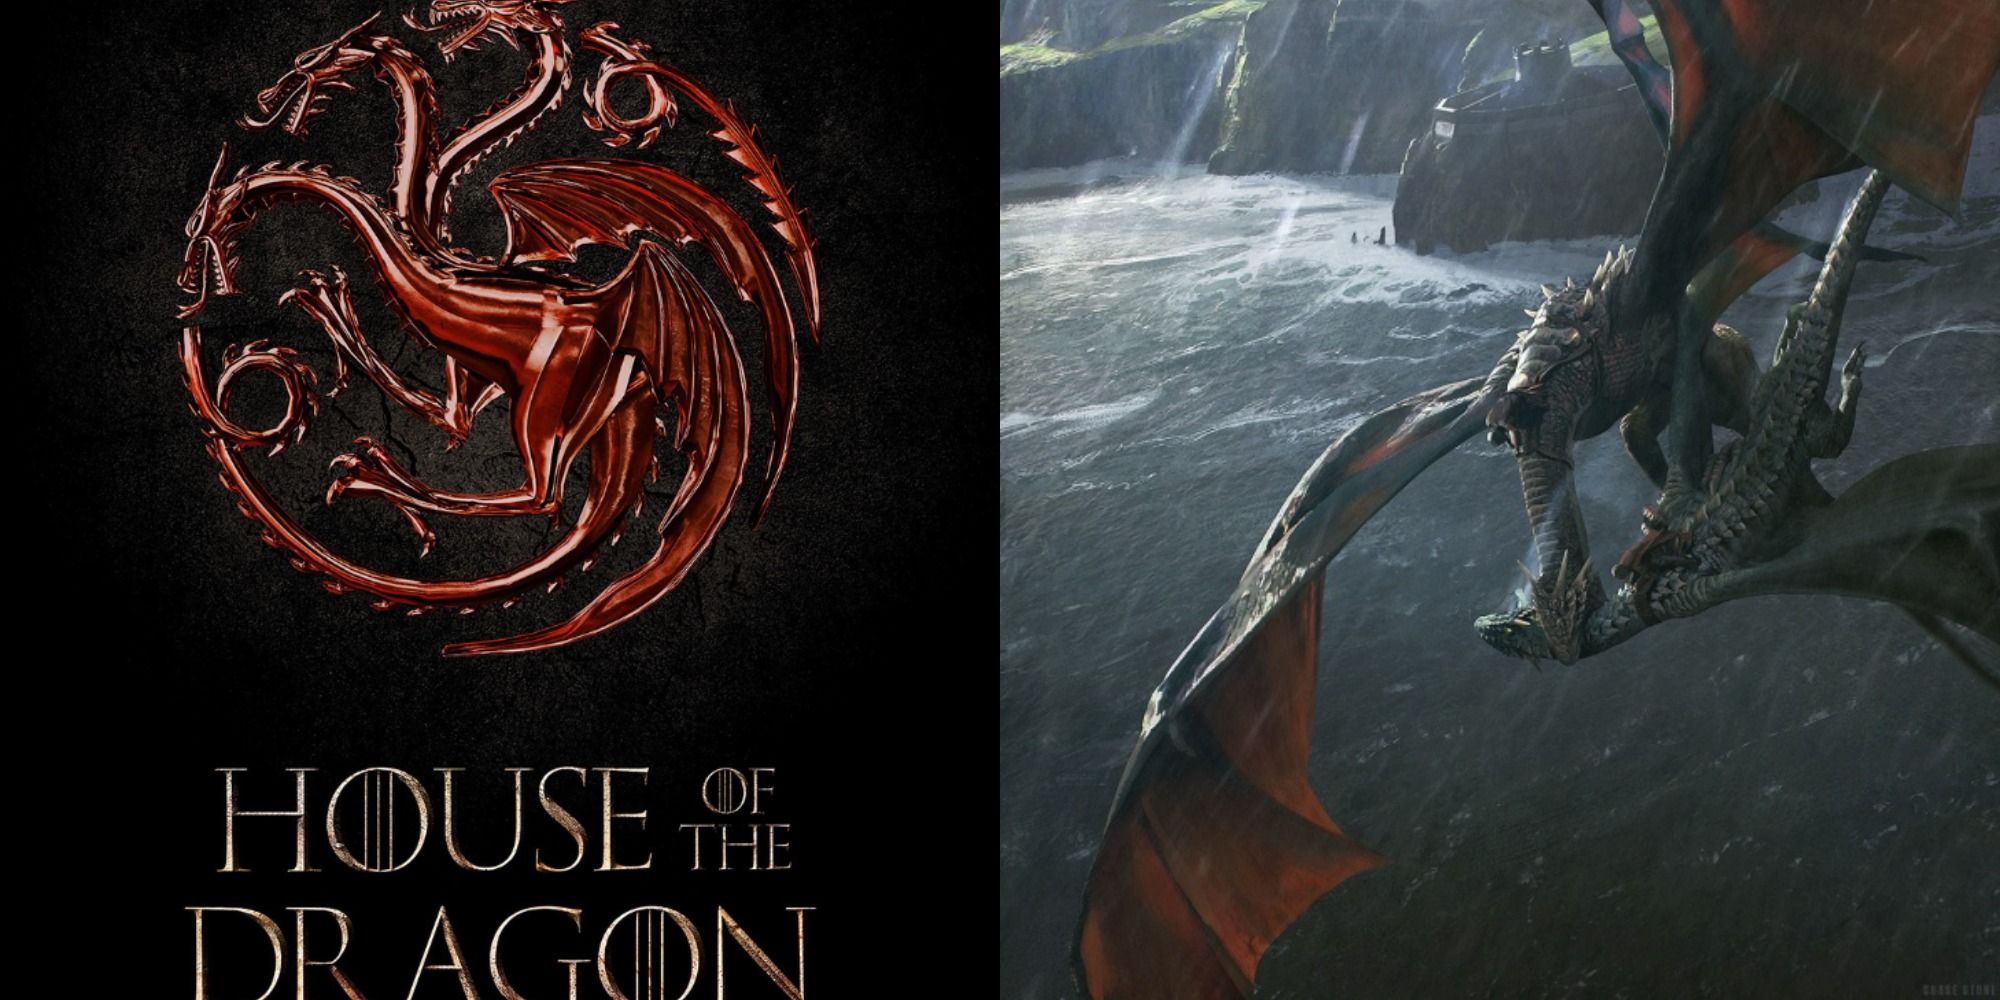 Split image showing the poster for House of the Dragon and a depiction of the battle between Arrax and Vhagar